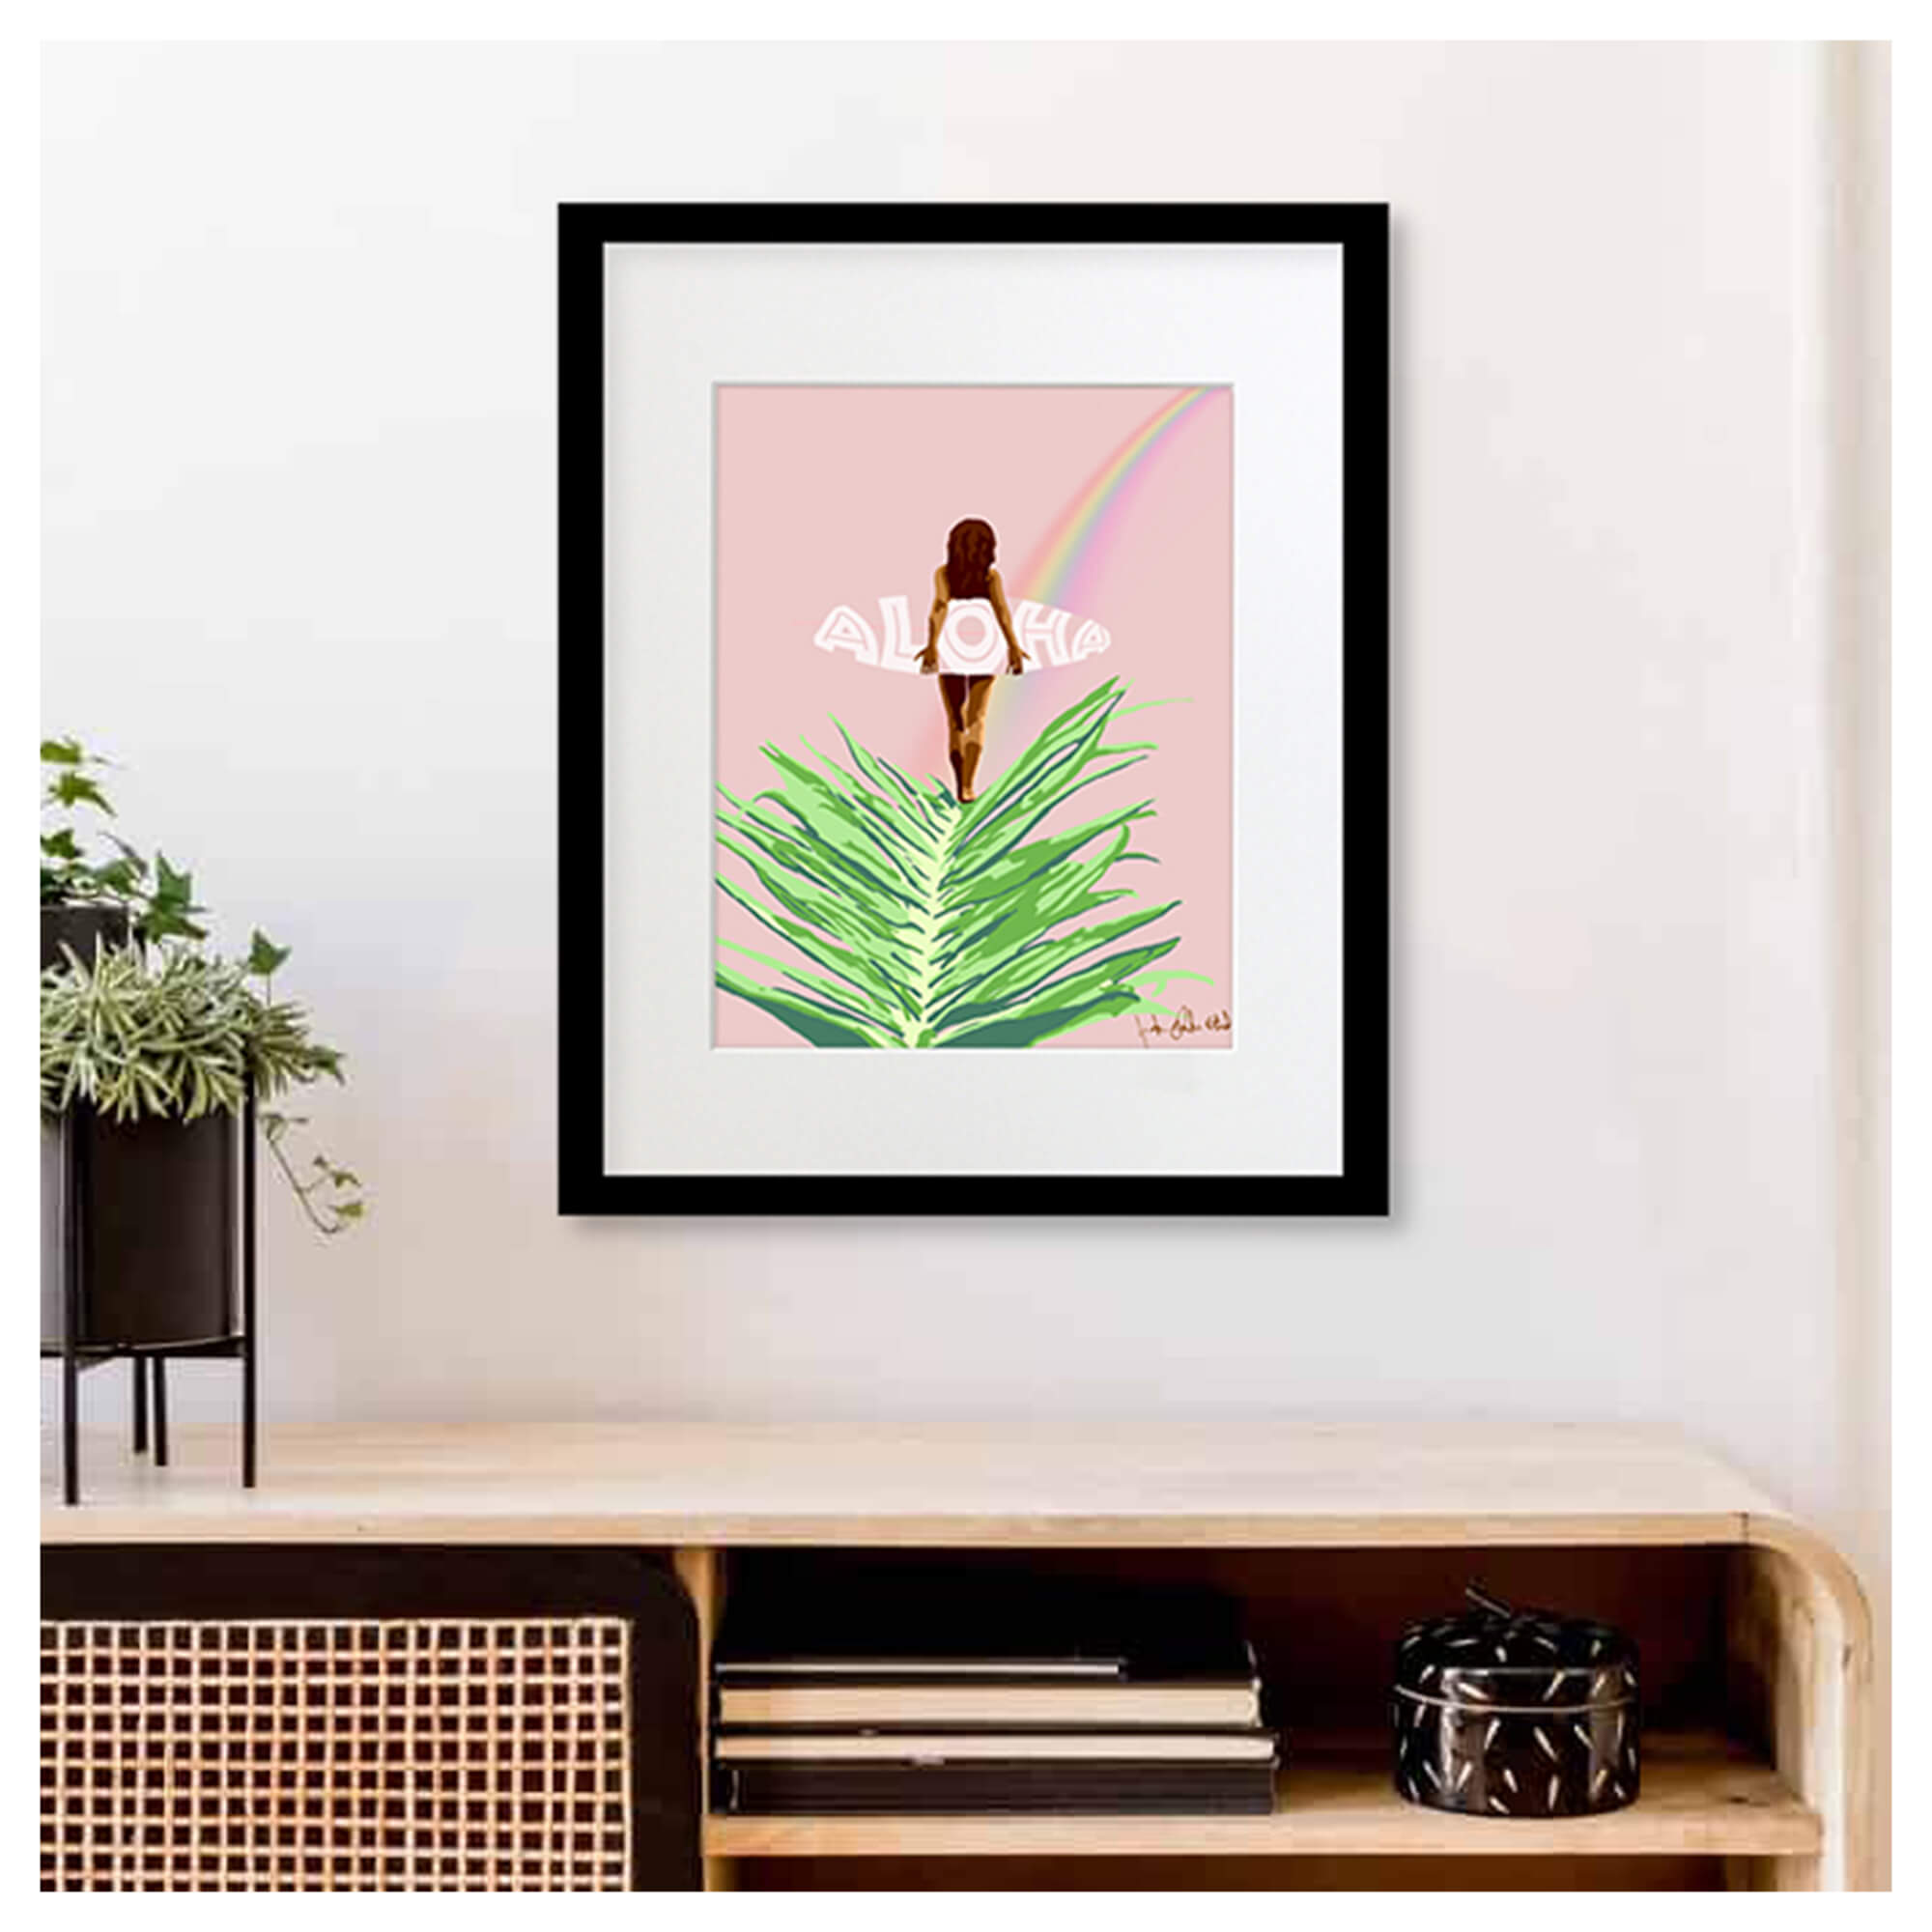 A framed matted art print featuring a woman holding a surfboard following a beautiful rainbow on a pastel pink background by Hawaii artist Jackie Eitel